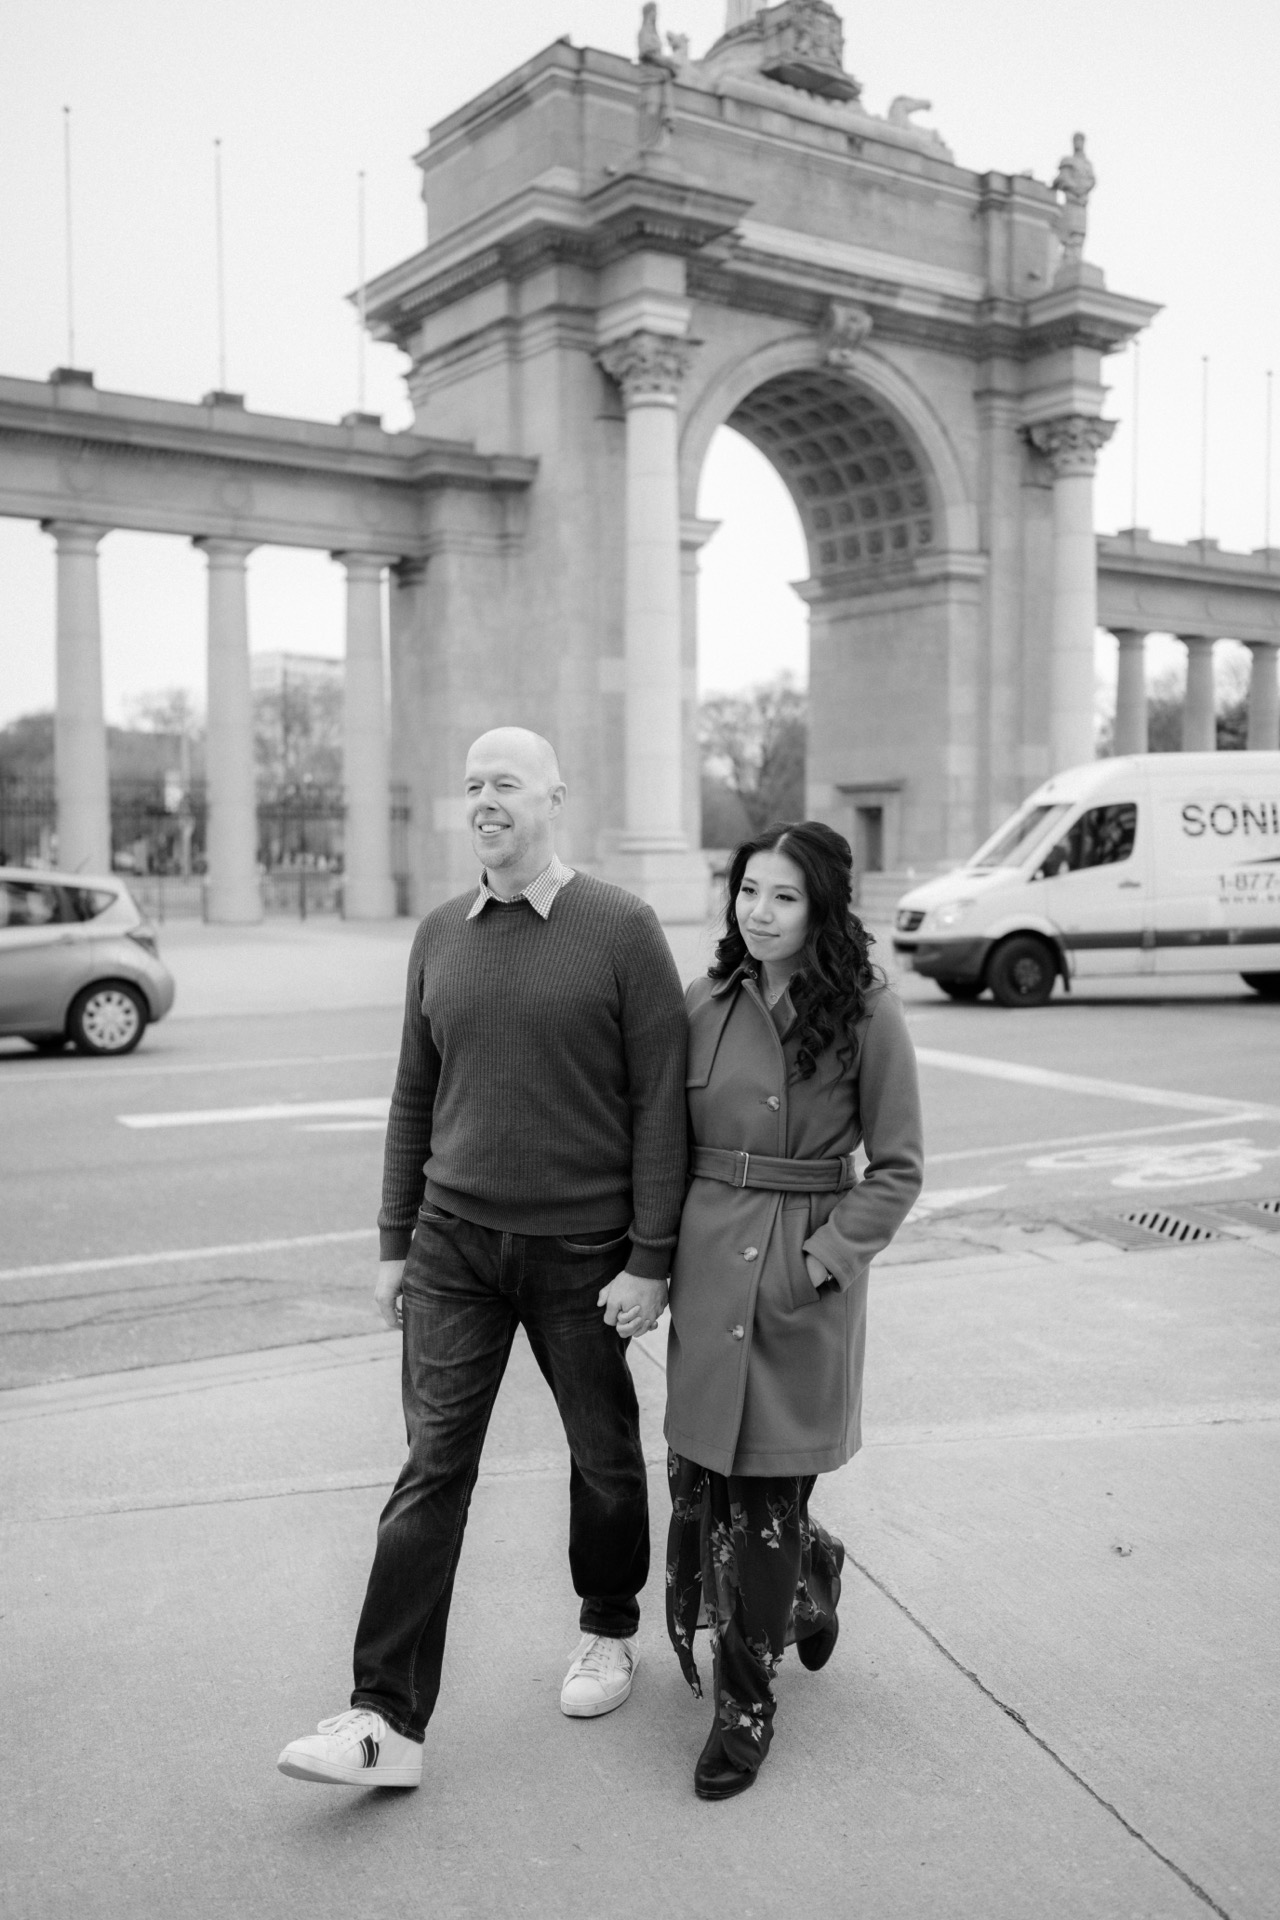 A couple walking hand in hand near an arch monument in a city setting, captured in black and white.